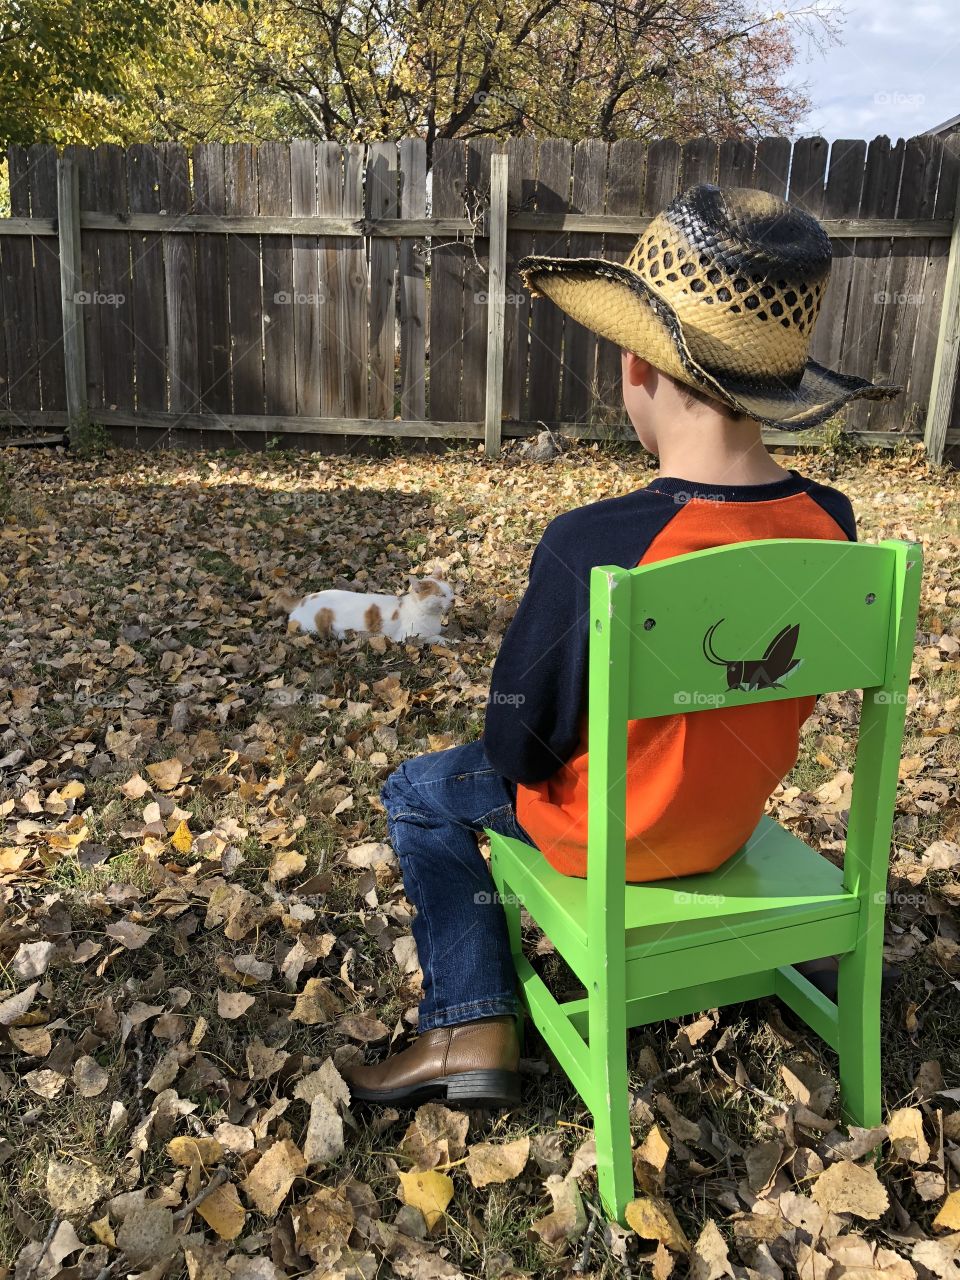 Cowboy and a cat playing outdoors